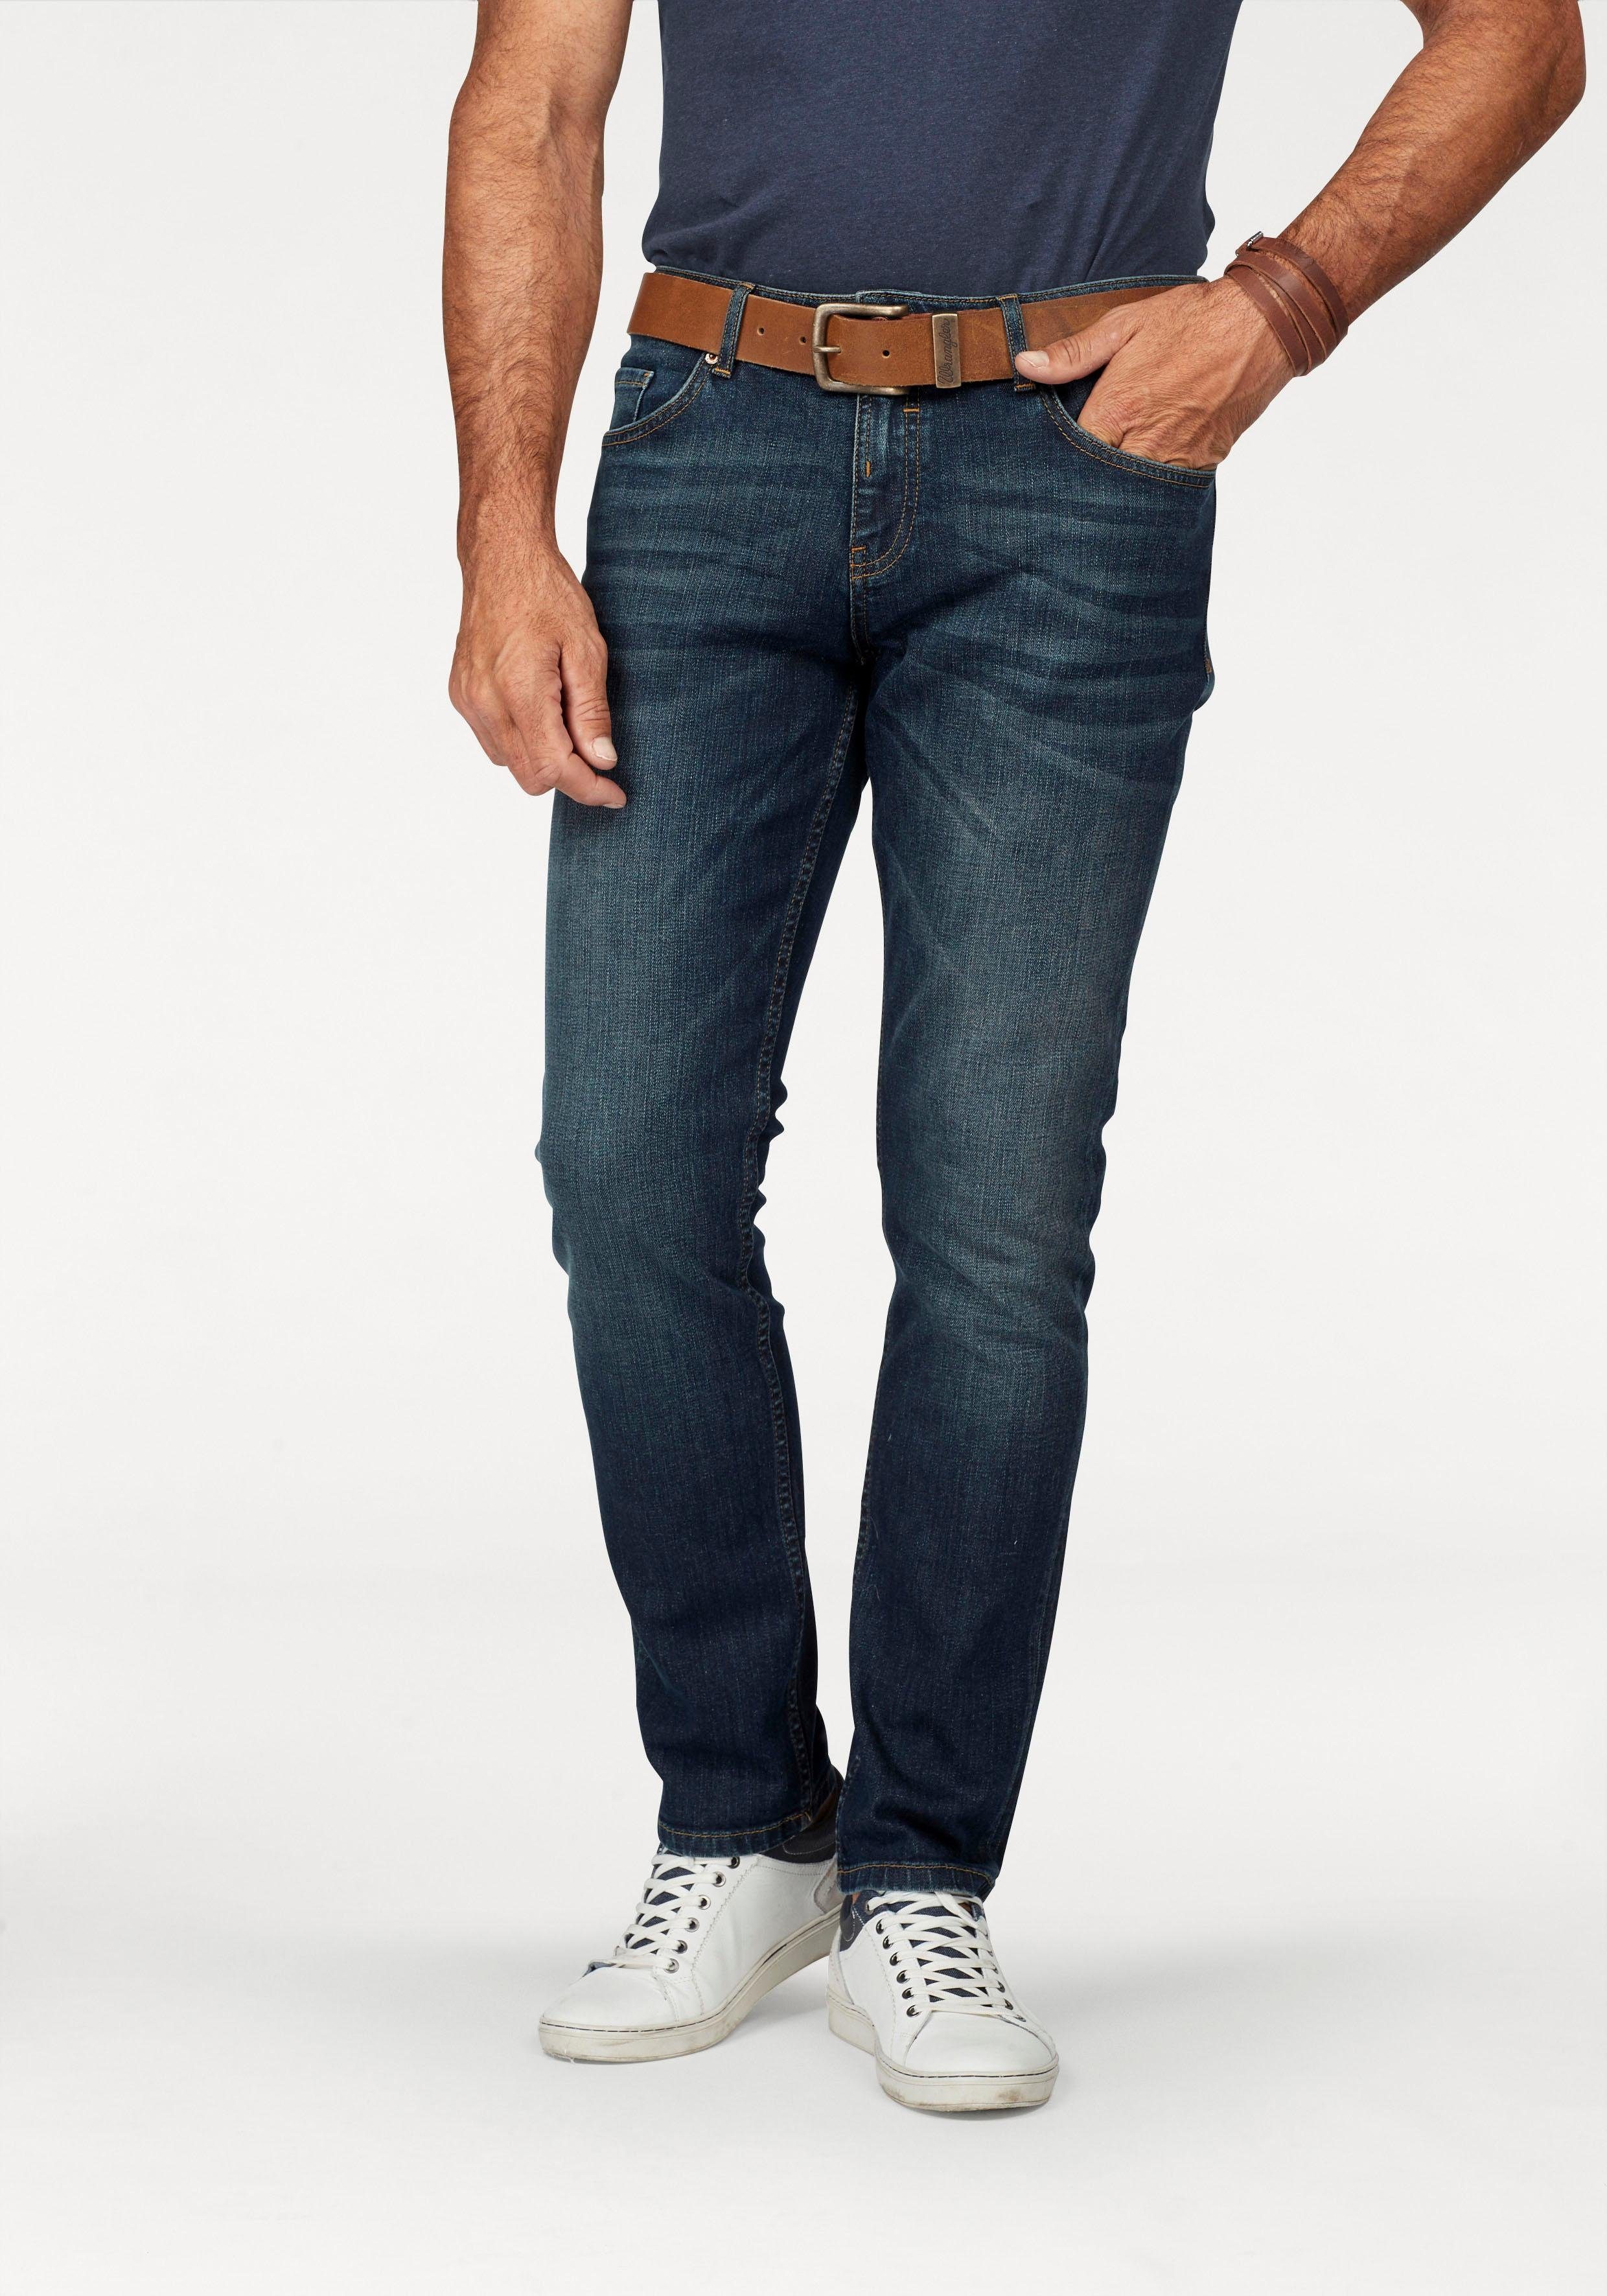 Otto - H.I.S NU 15% KORTING: H.I.S slim fit jeans Cliff